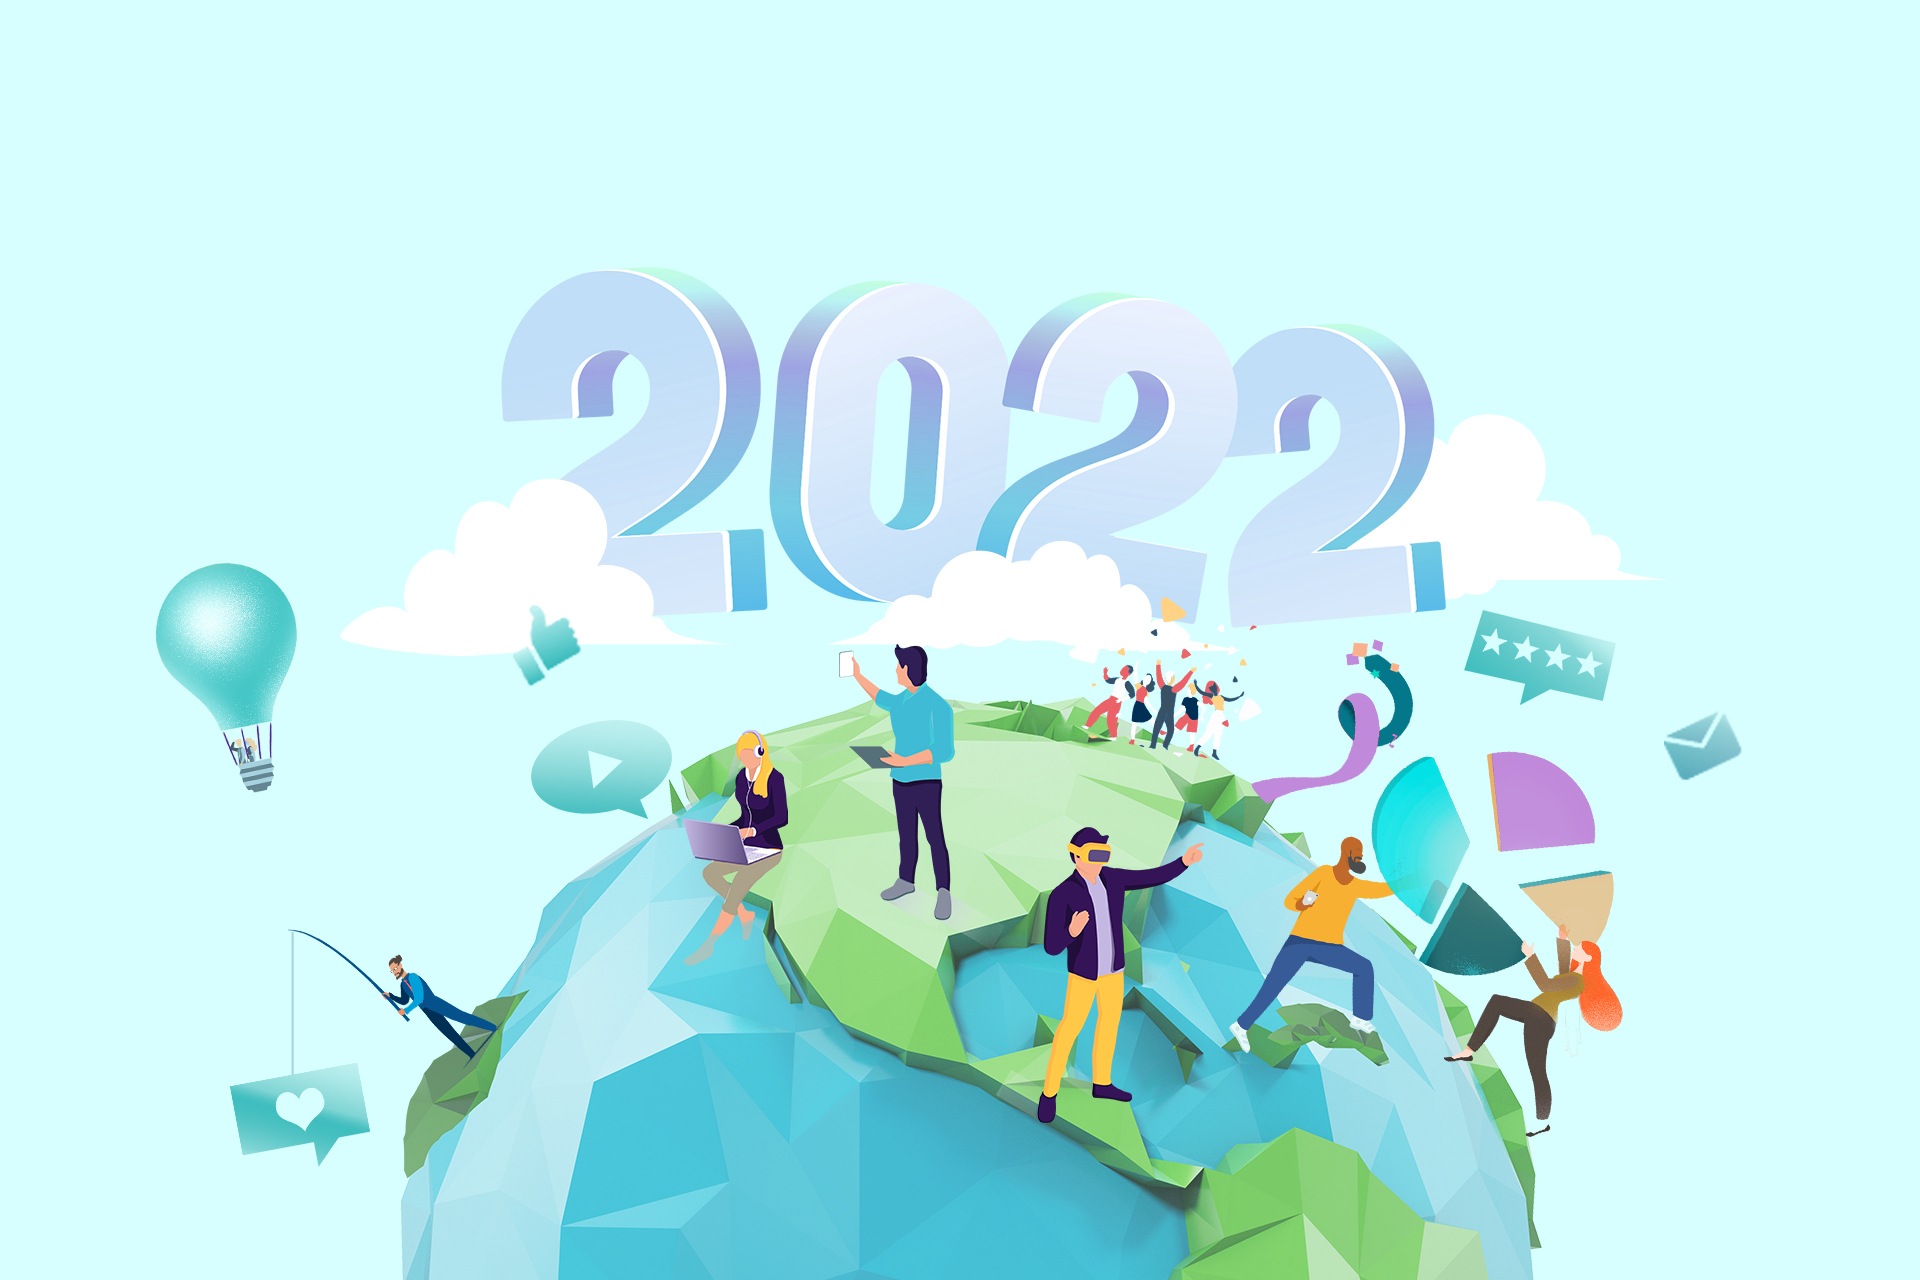 Illustration of a big globe with 2022